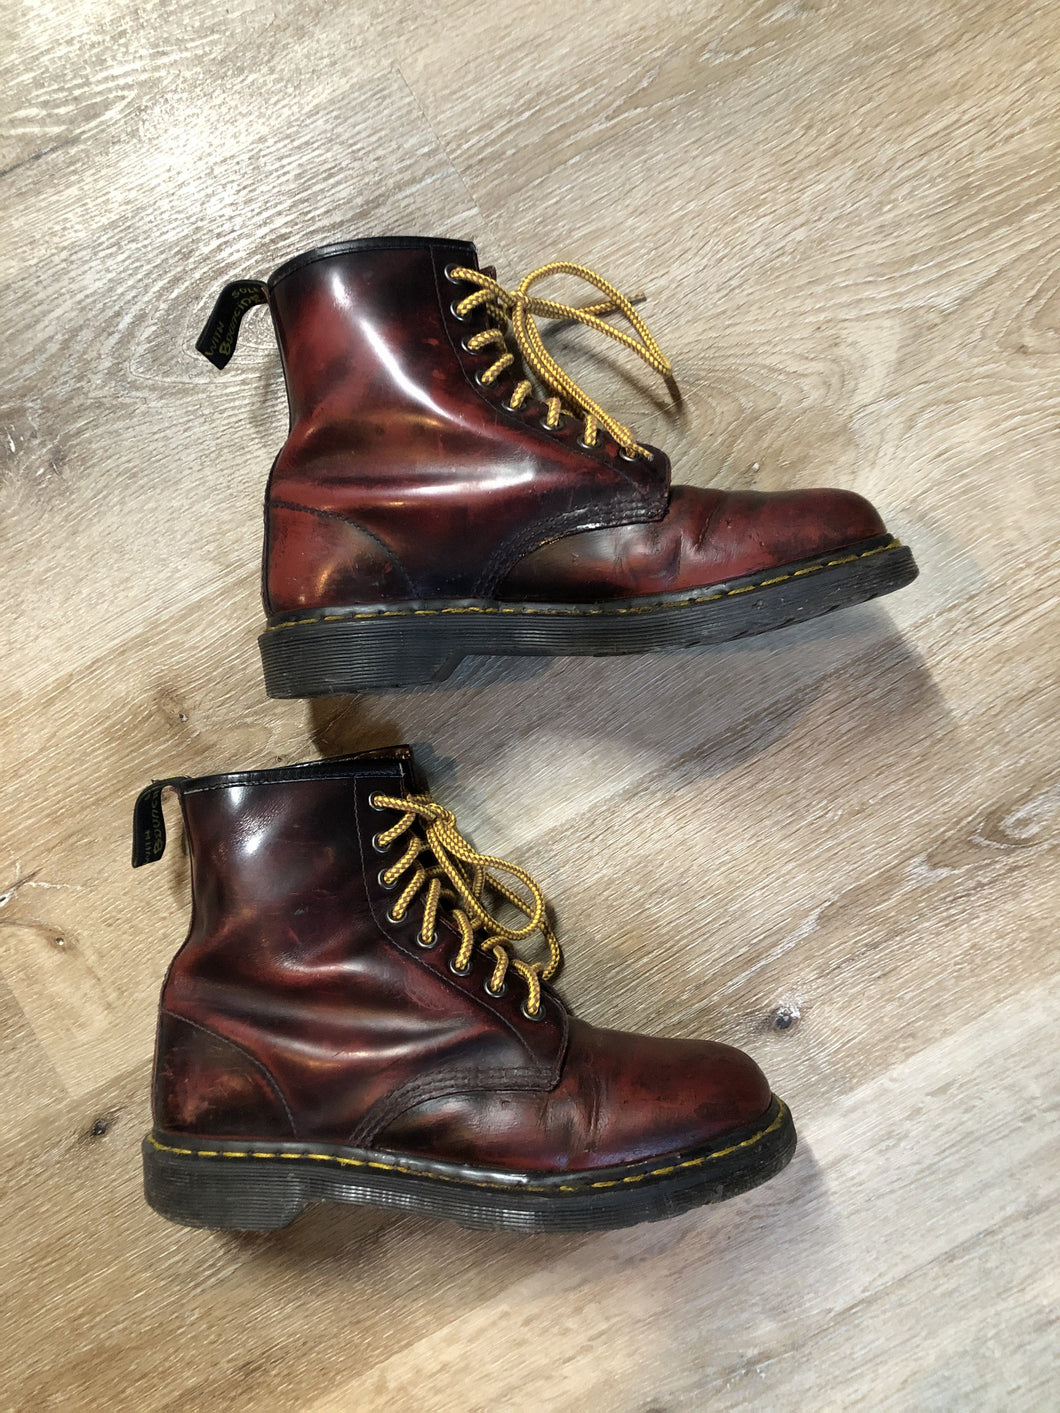 Kingspier Vintage - Doc Martens 1460 Original 8 eyelet boot in red and black with smooth leather upper and iconic airwair sole.

Size 8 W

*Boots are well worn.